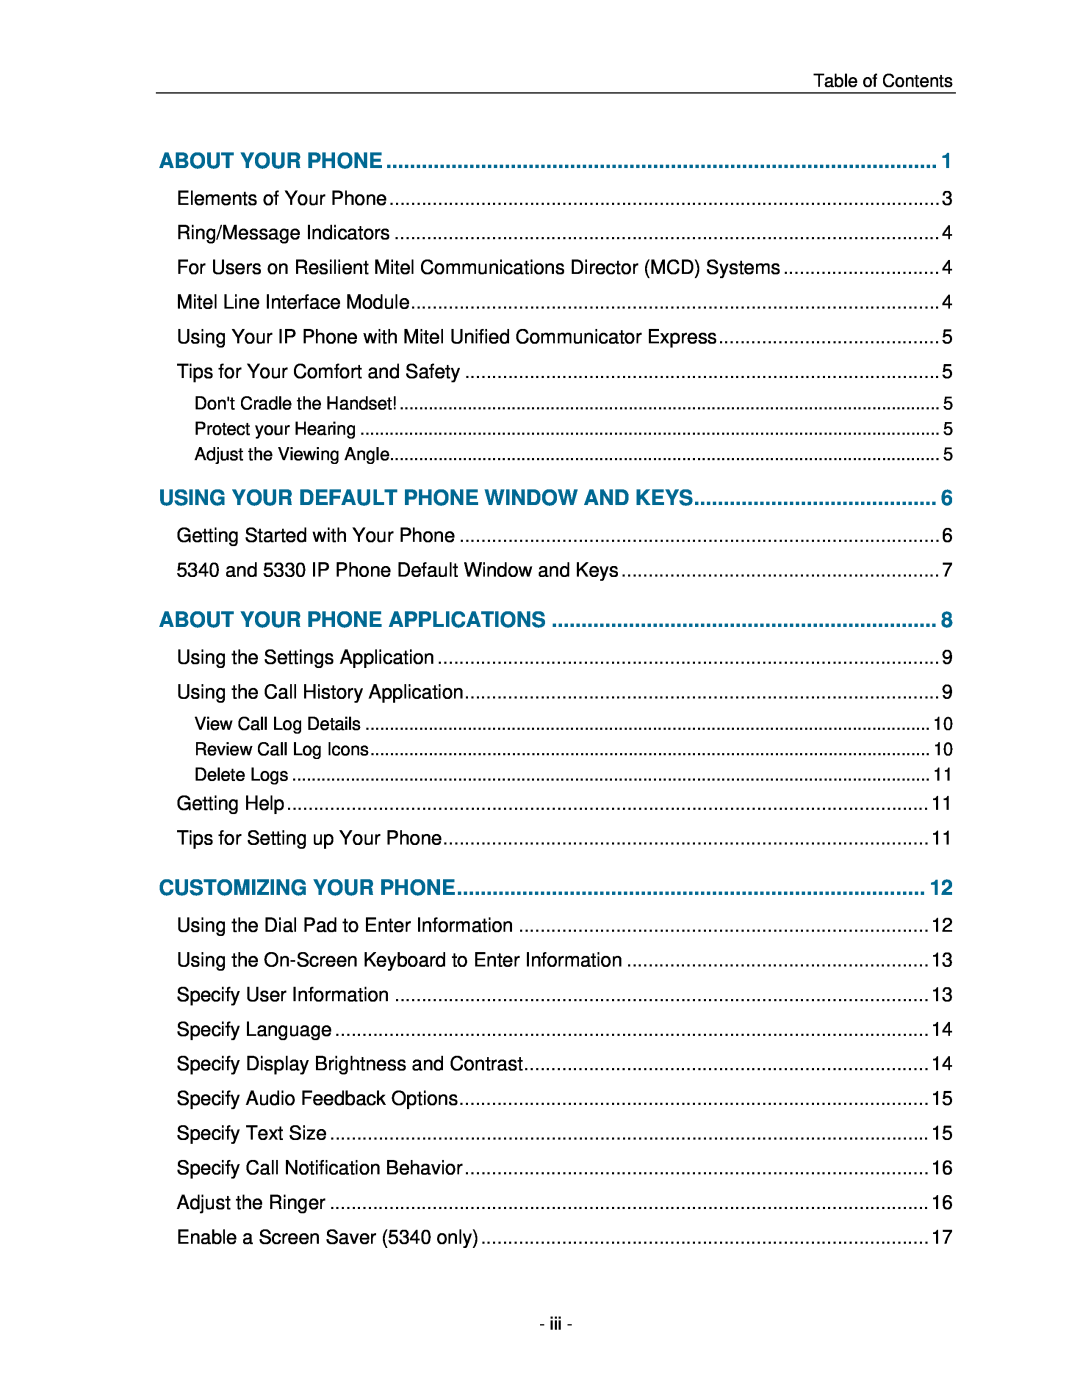 Mitel 5330 manual Table of Contents, Using Your Default Phone Window And Keys, Customizing Your Phone 